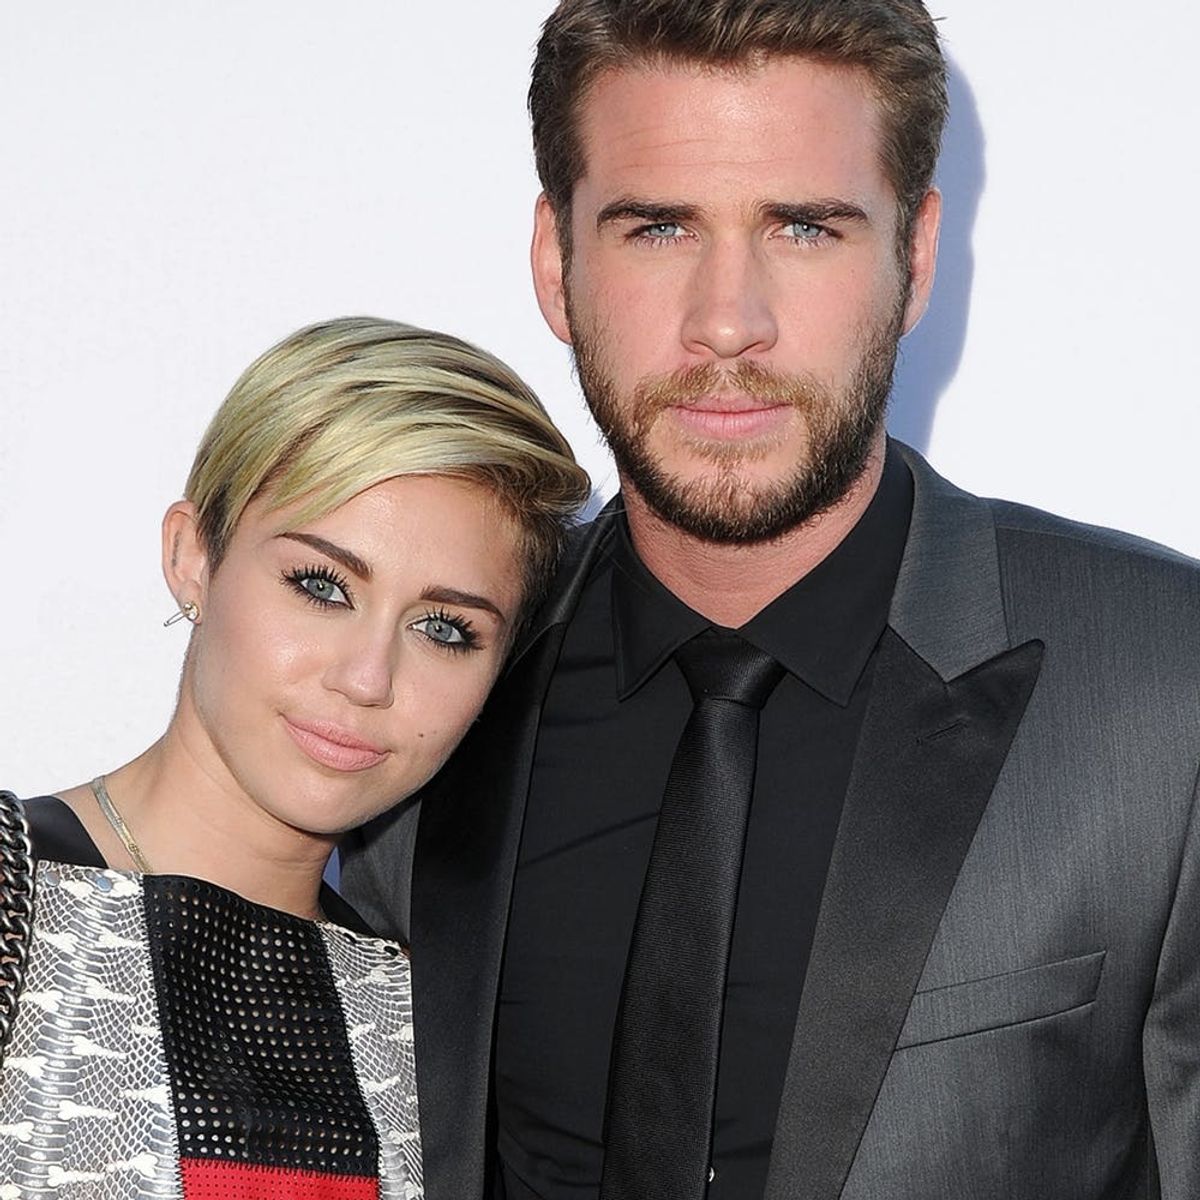 Miley Cyrus Is Wearing Her Engagement Ring Again… So What Does That Mean?